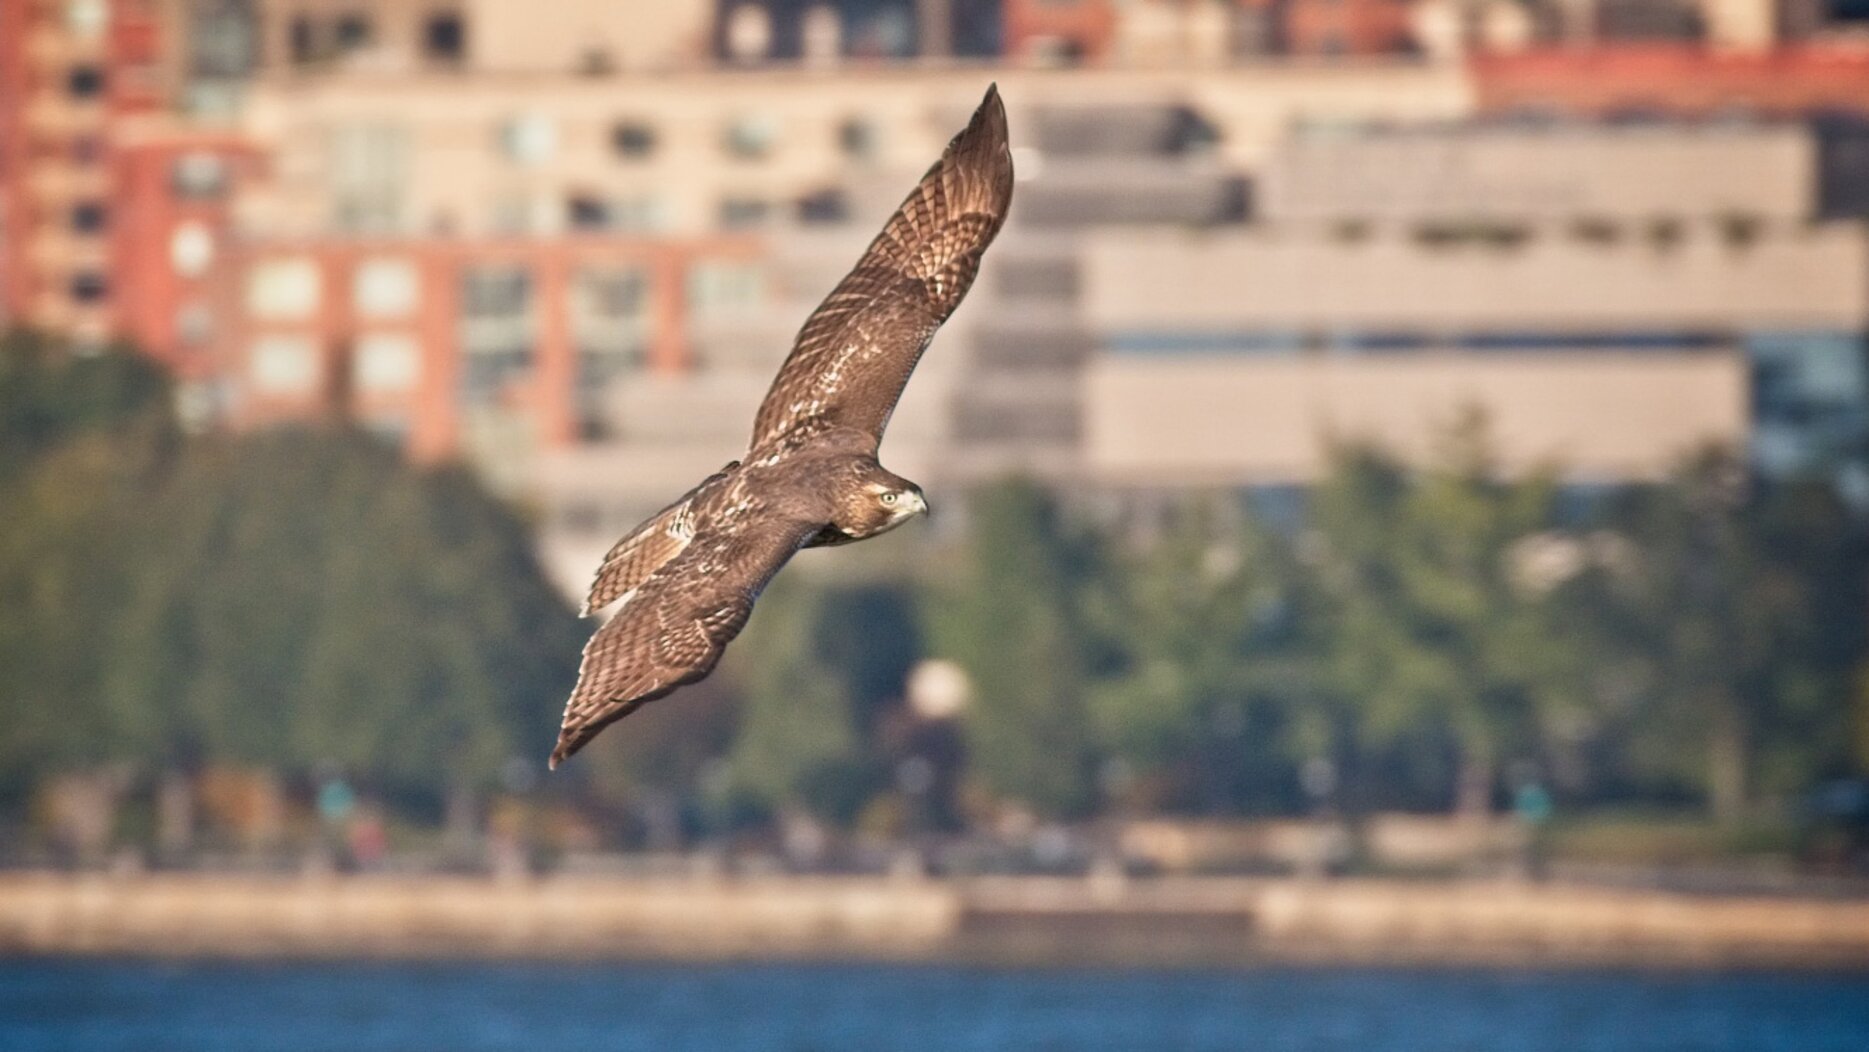 Red-tailed Hawk on Governors Island. Photo: <a href="http://www.gogginphotography.com/" target="_blank">Laura Goggin</a>